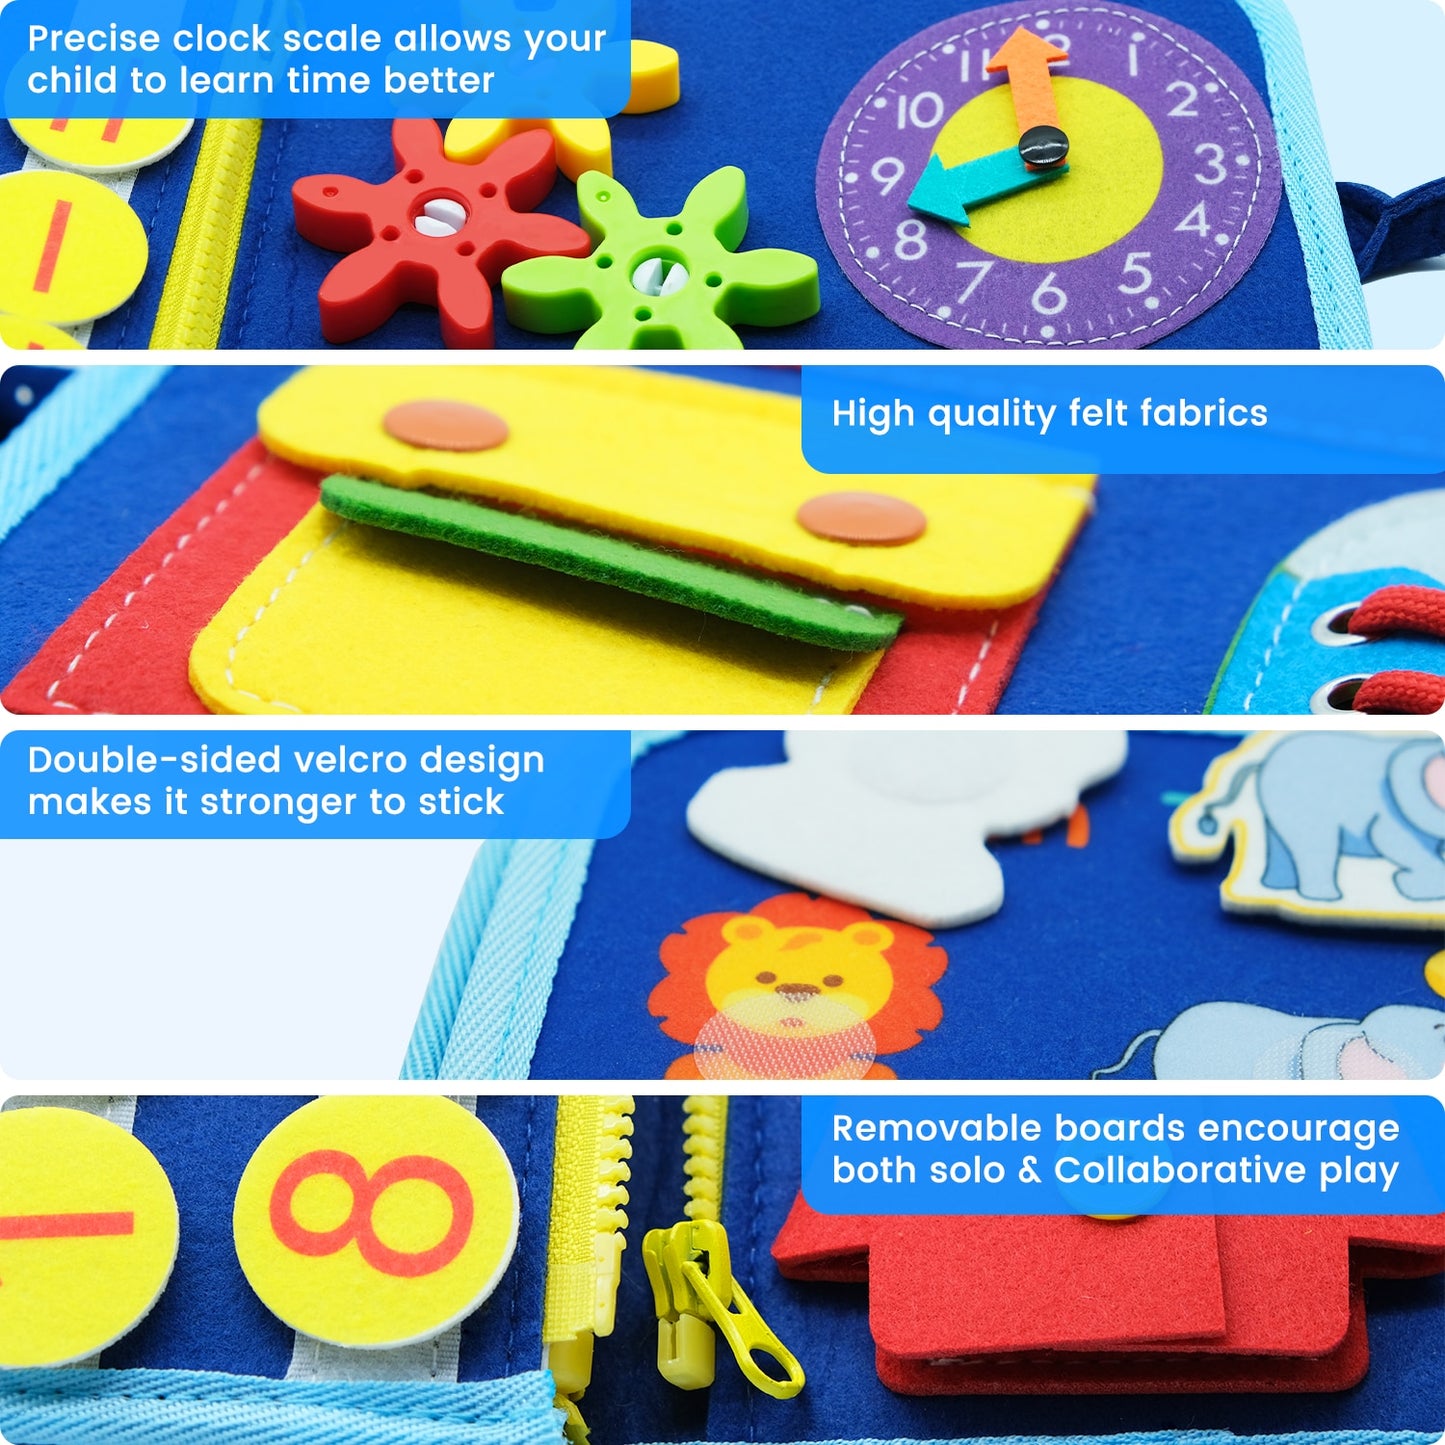 Montessori Busy Board for Toddlers - Early Educational Sensory Toys for Motor Skills, Basic Dressing, Math, Colors, Shapes, Animals, and Weather